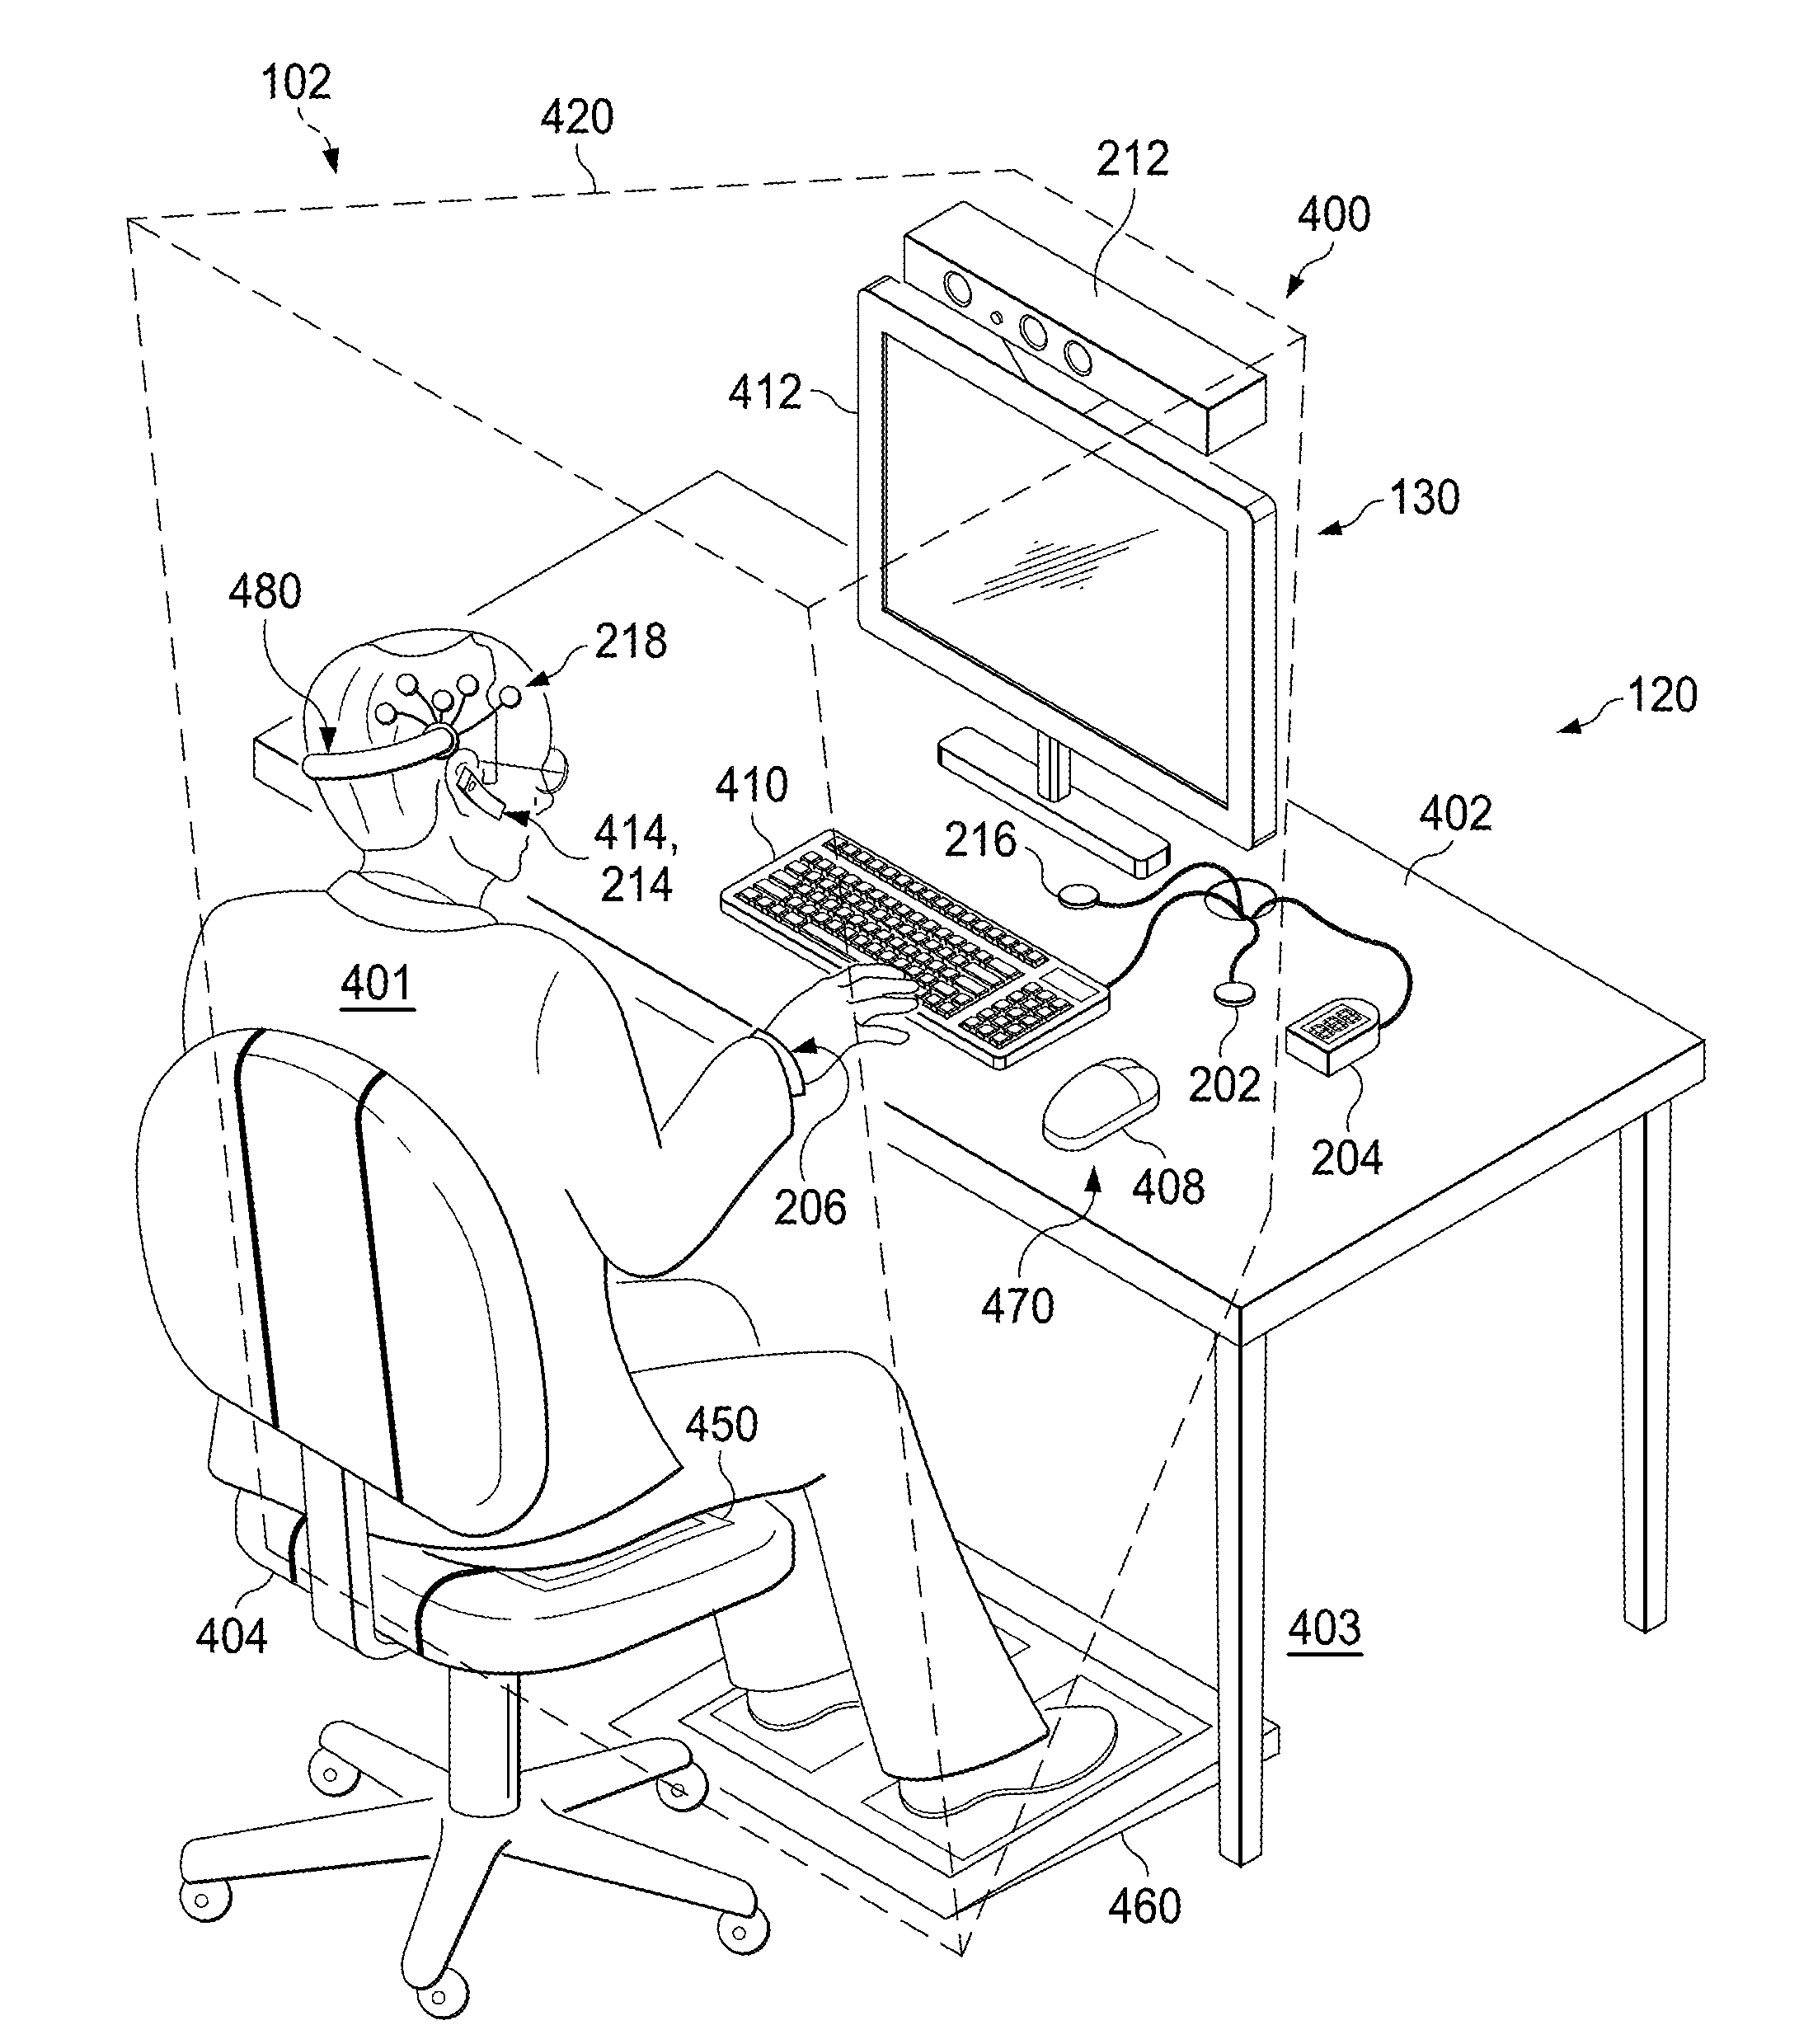 Chair pad system and associated, computer medium and computer-implemented methods for monitoring and improving health and productivity of employees